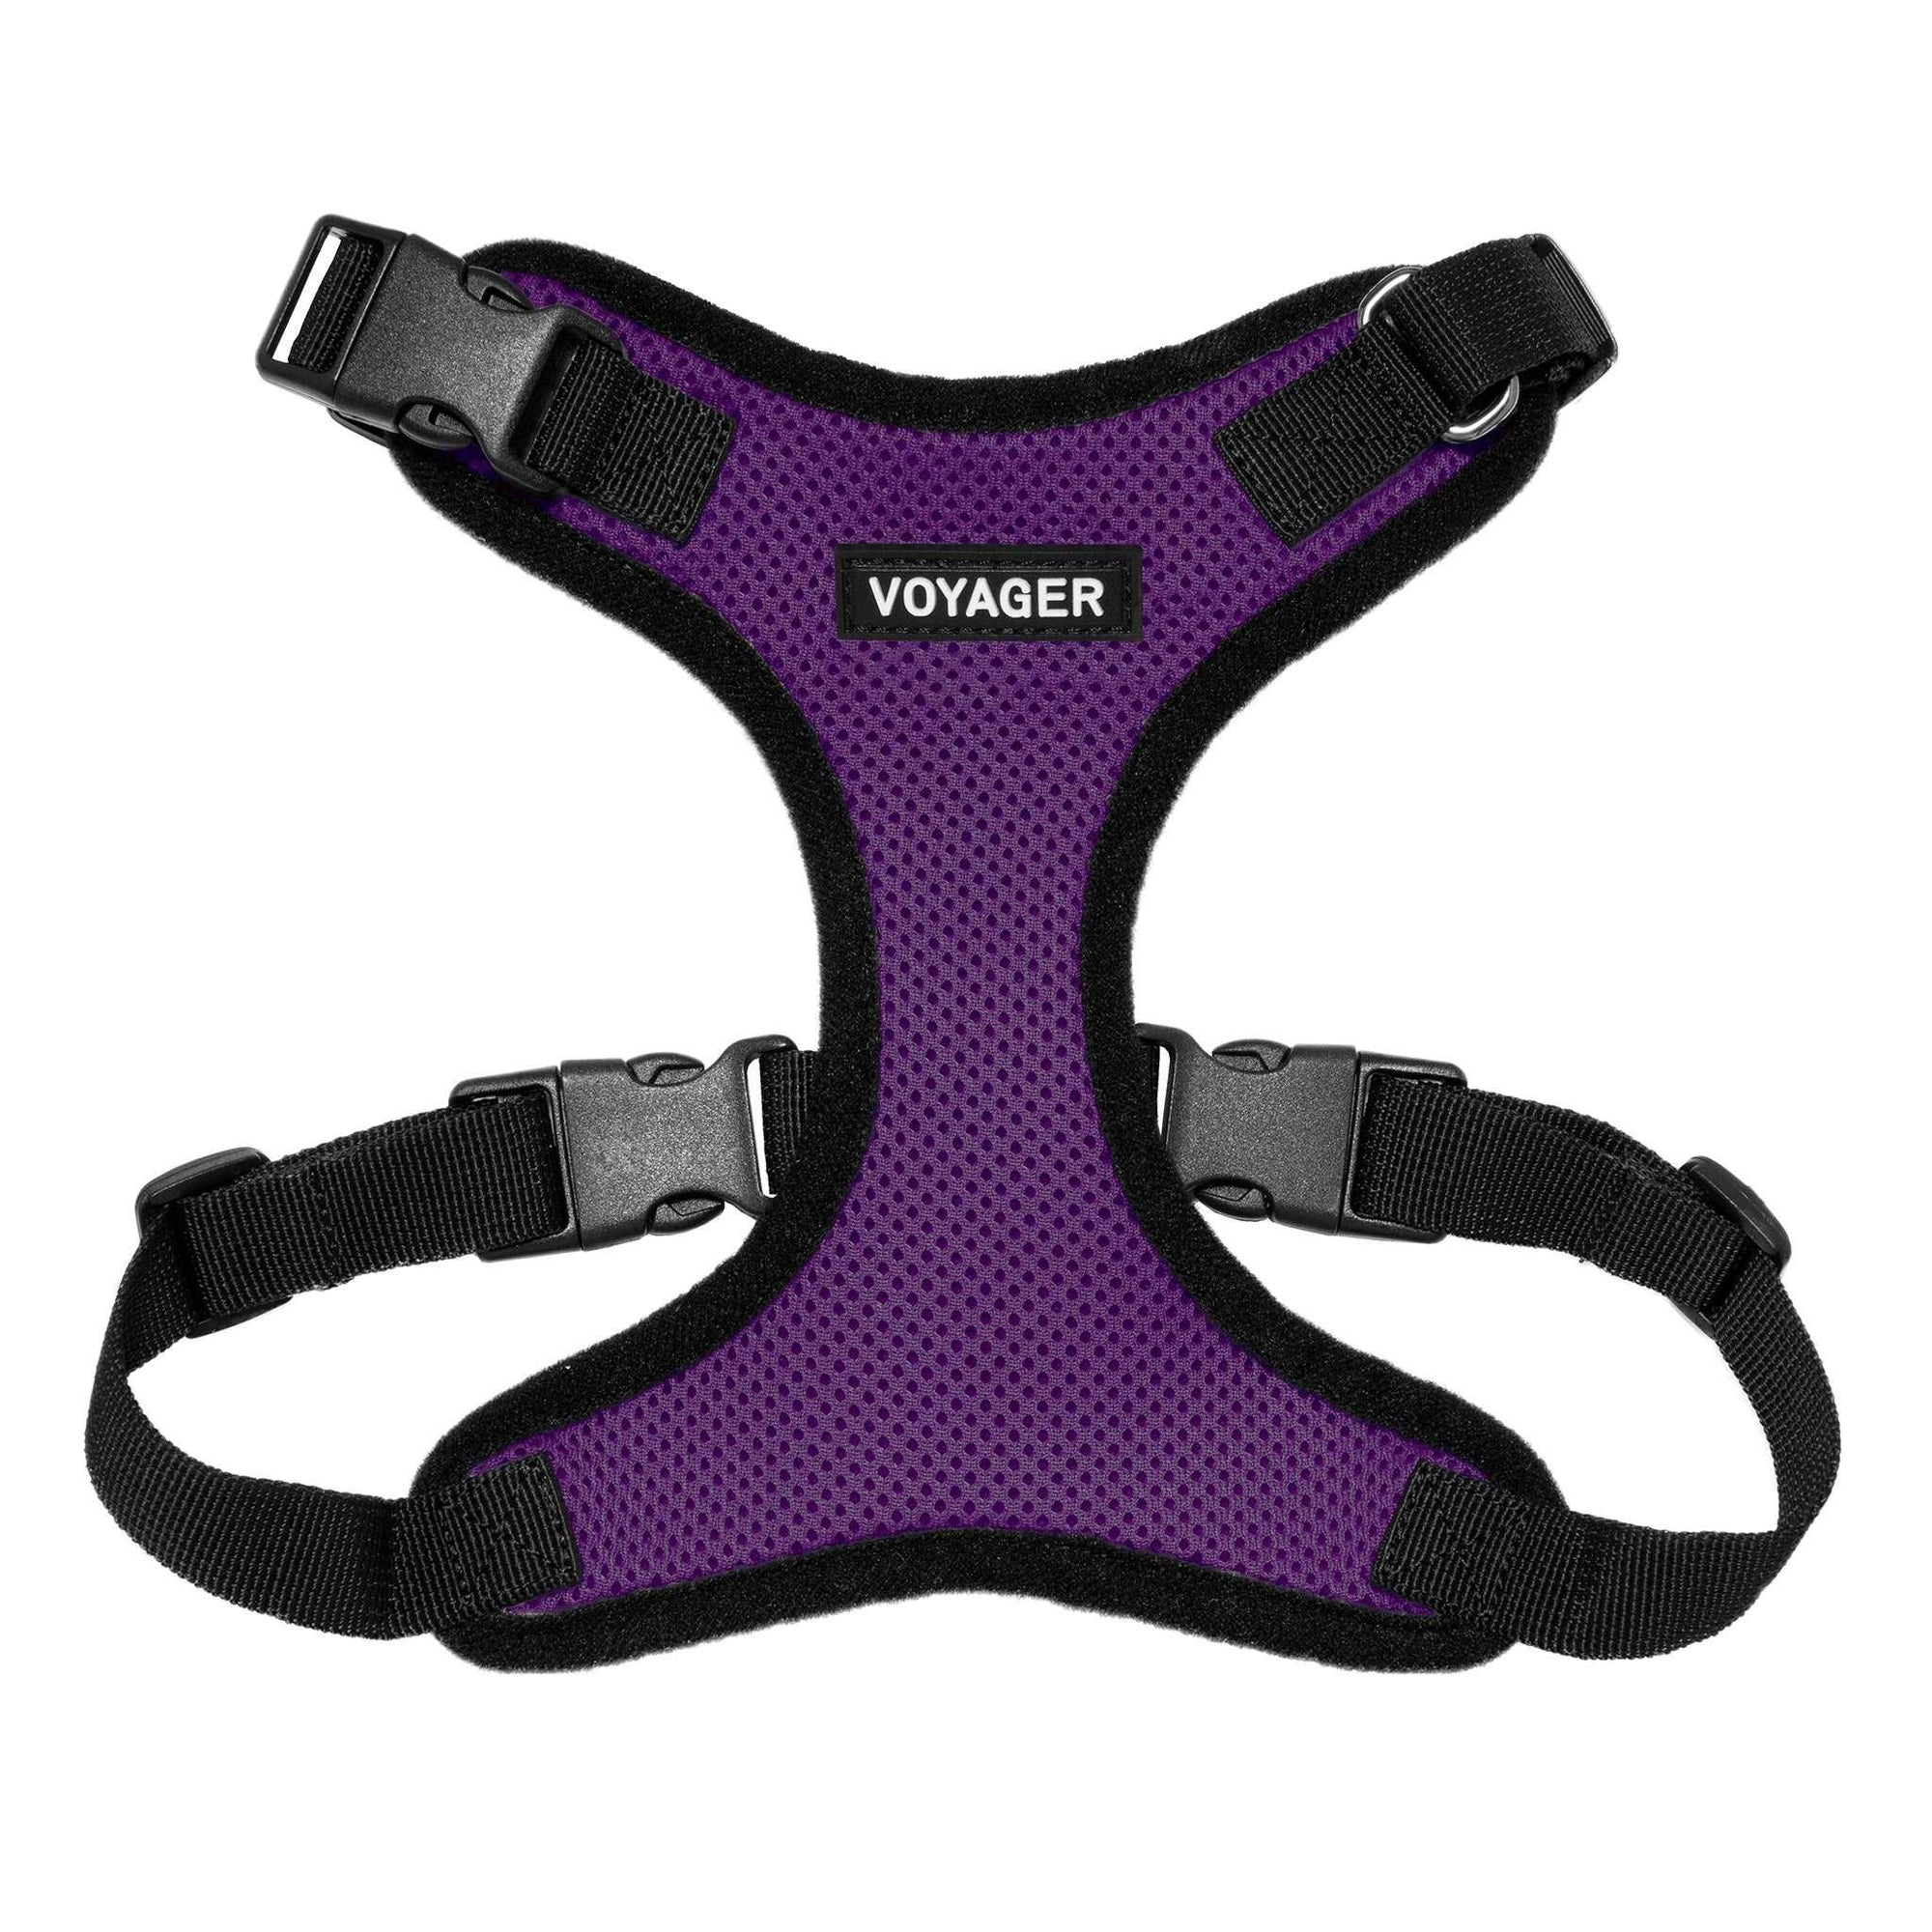 VOYAGER Step-In Lock Dog Harness in Purple with Black Trim and Webbing - Front